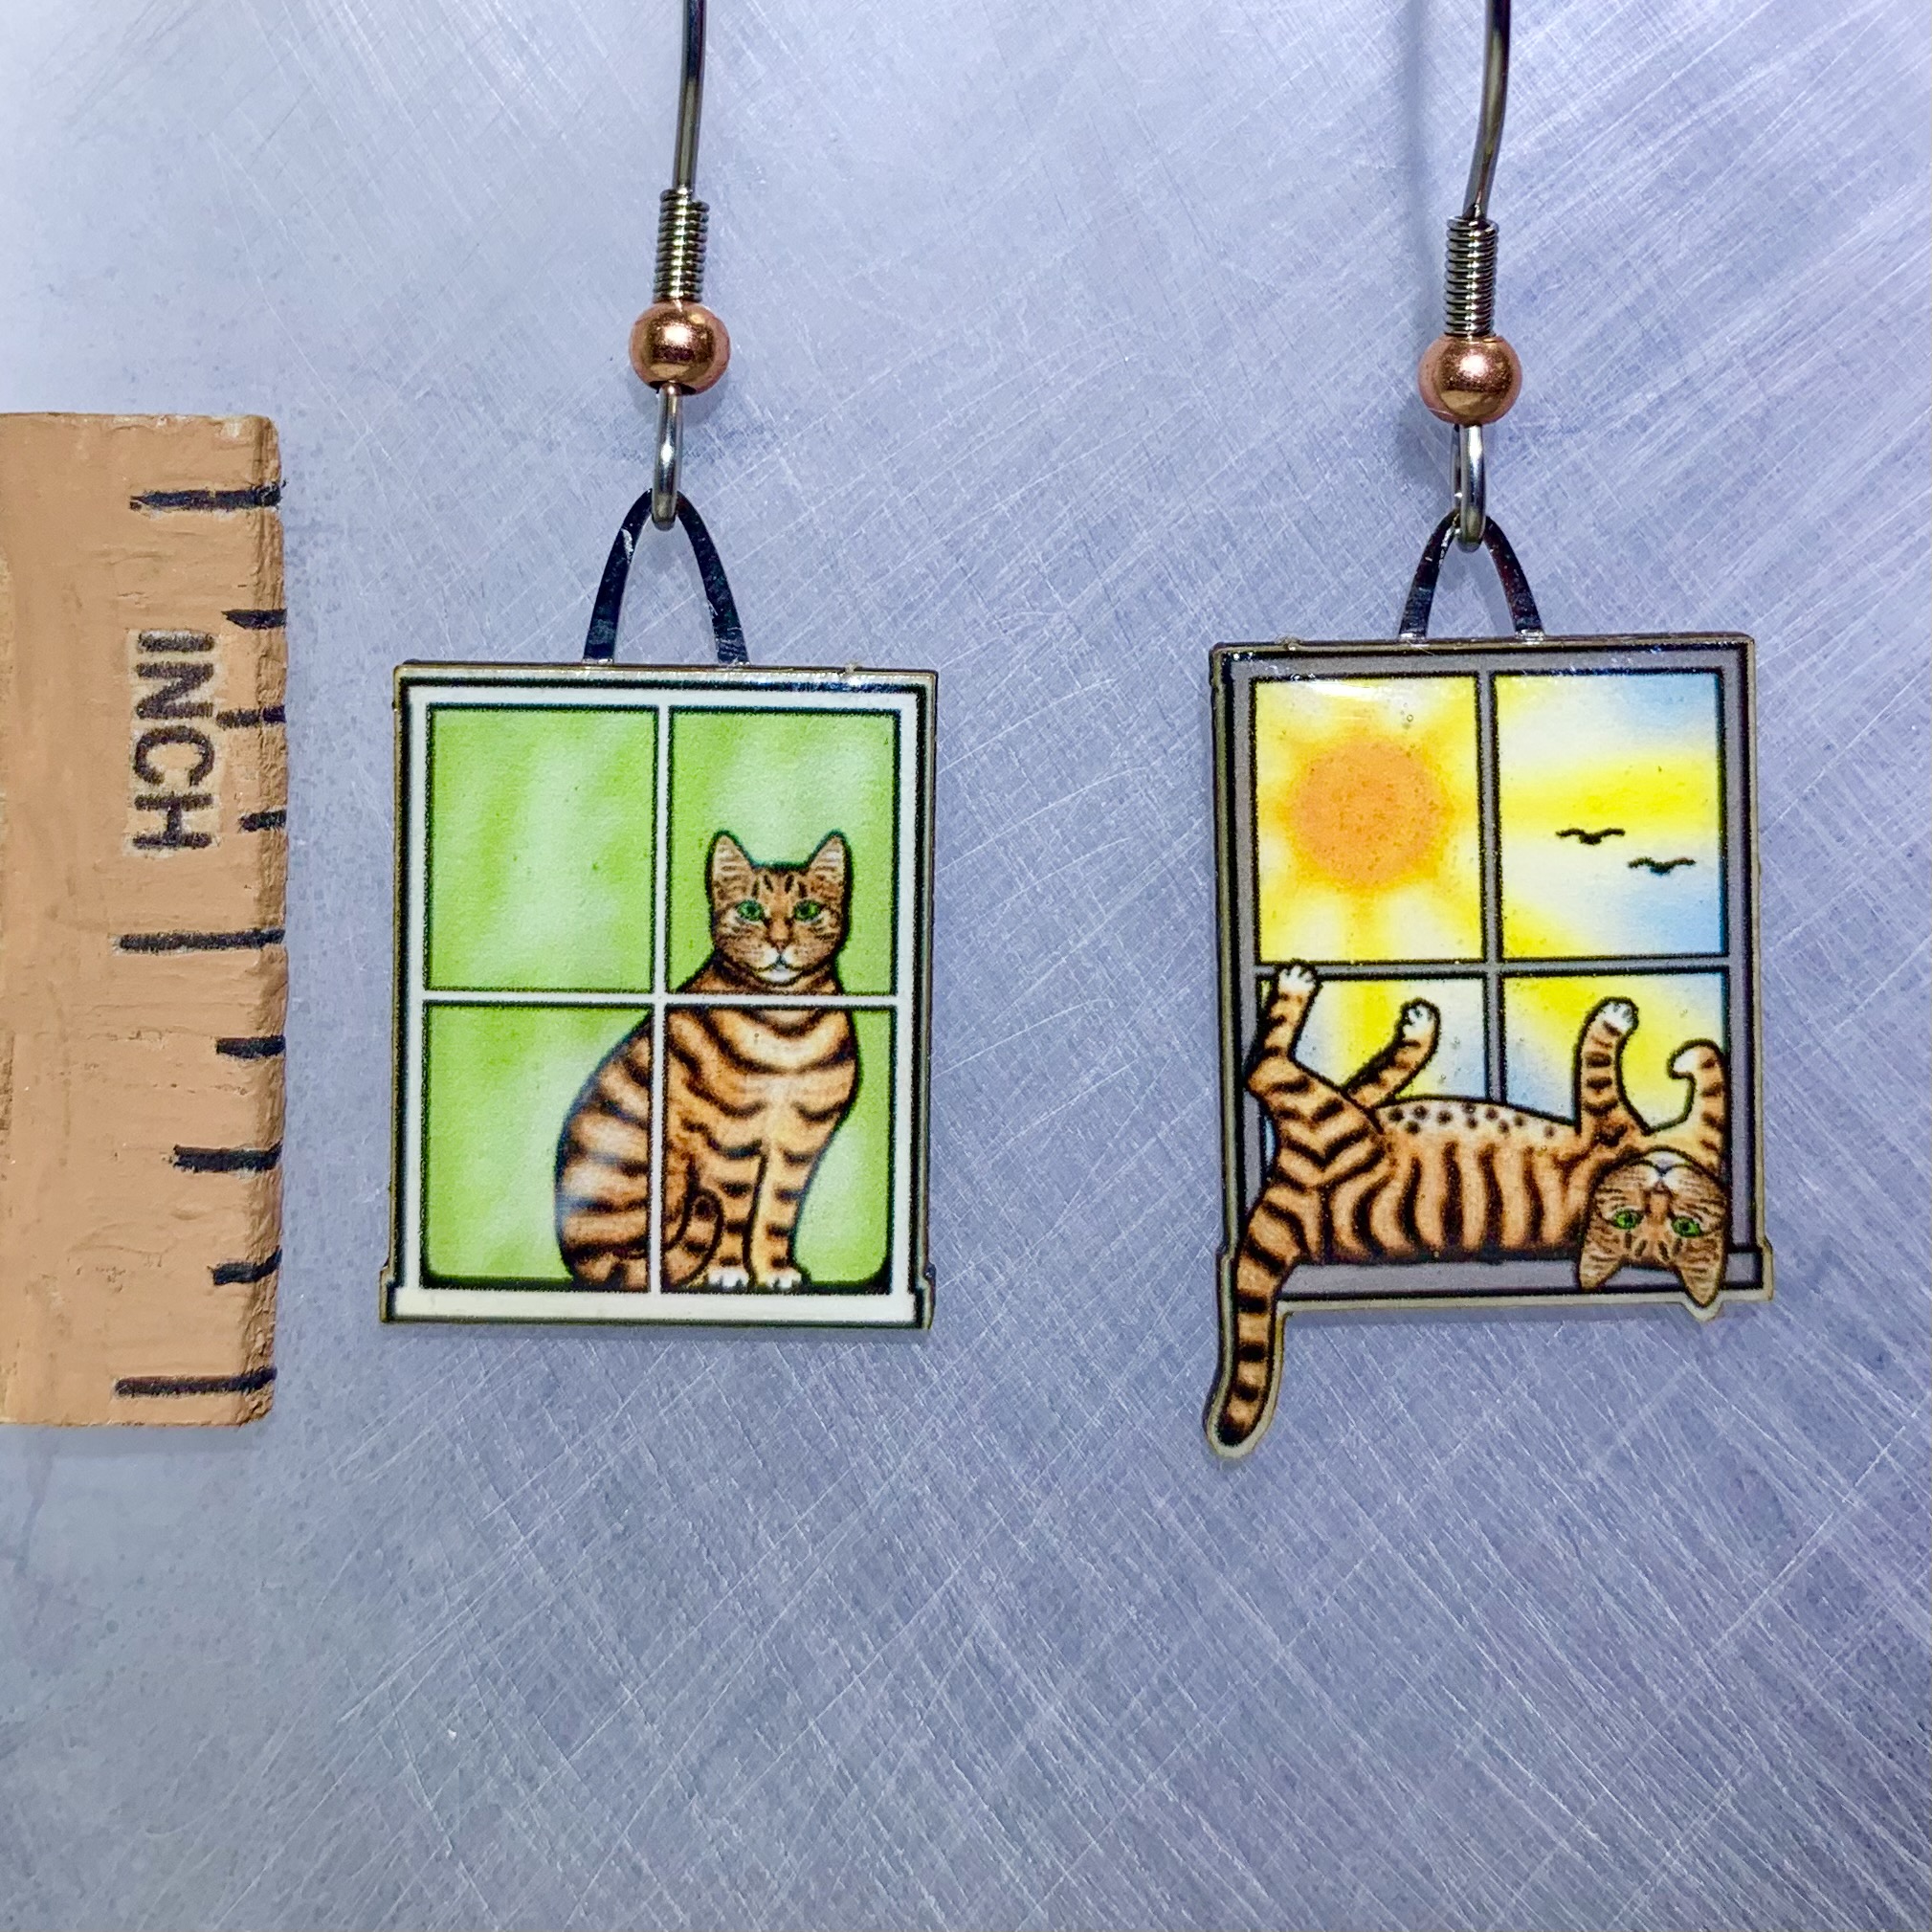 Picture shown is of 1 inch tall pair of earrings of the pet the Indoor Cat sitting on a window.